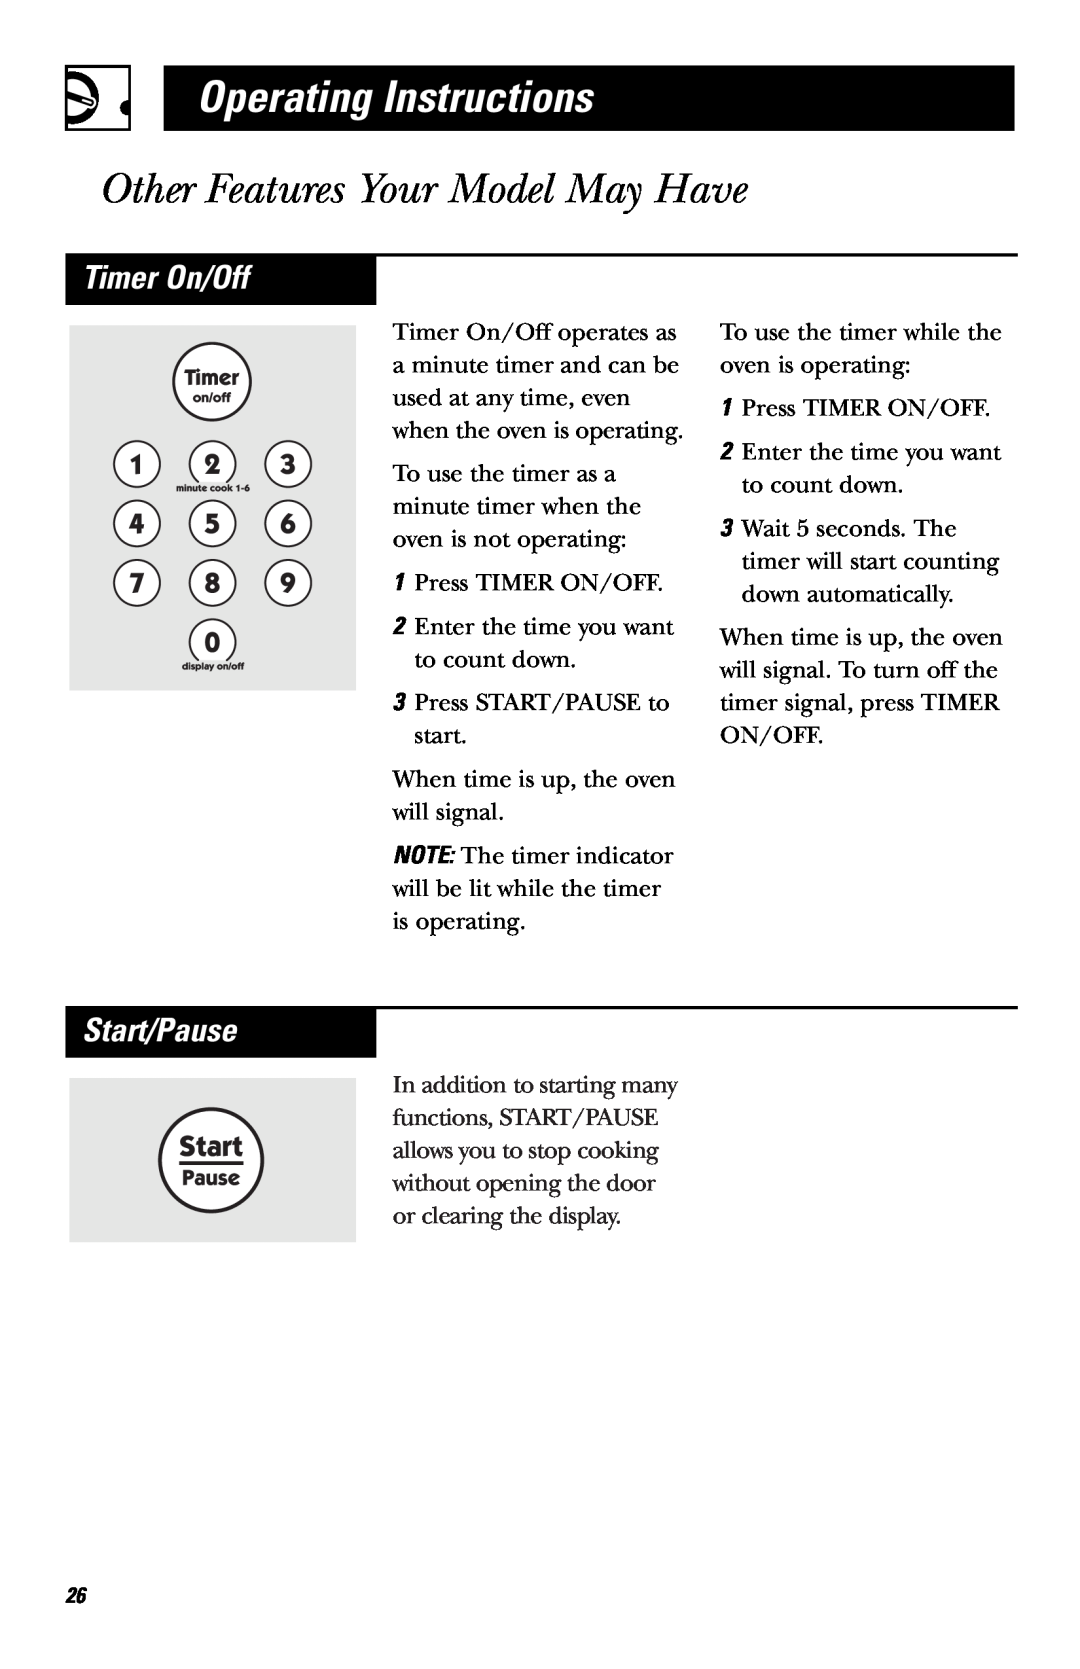 Hotpoint RVM1635 owner manual Timer On/Off, Start/Pause, Operating Instructions, Other Features Your Model May Have 